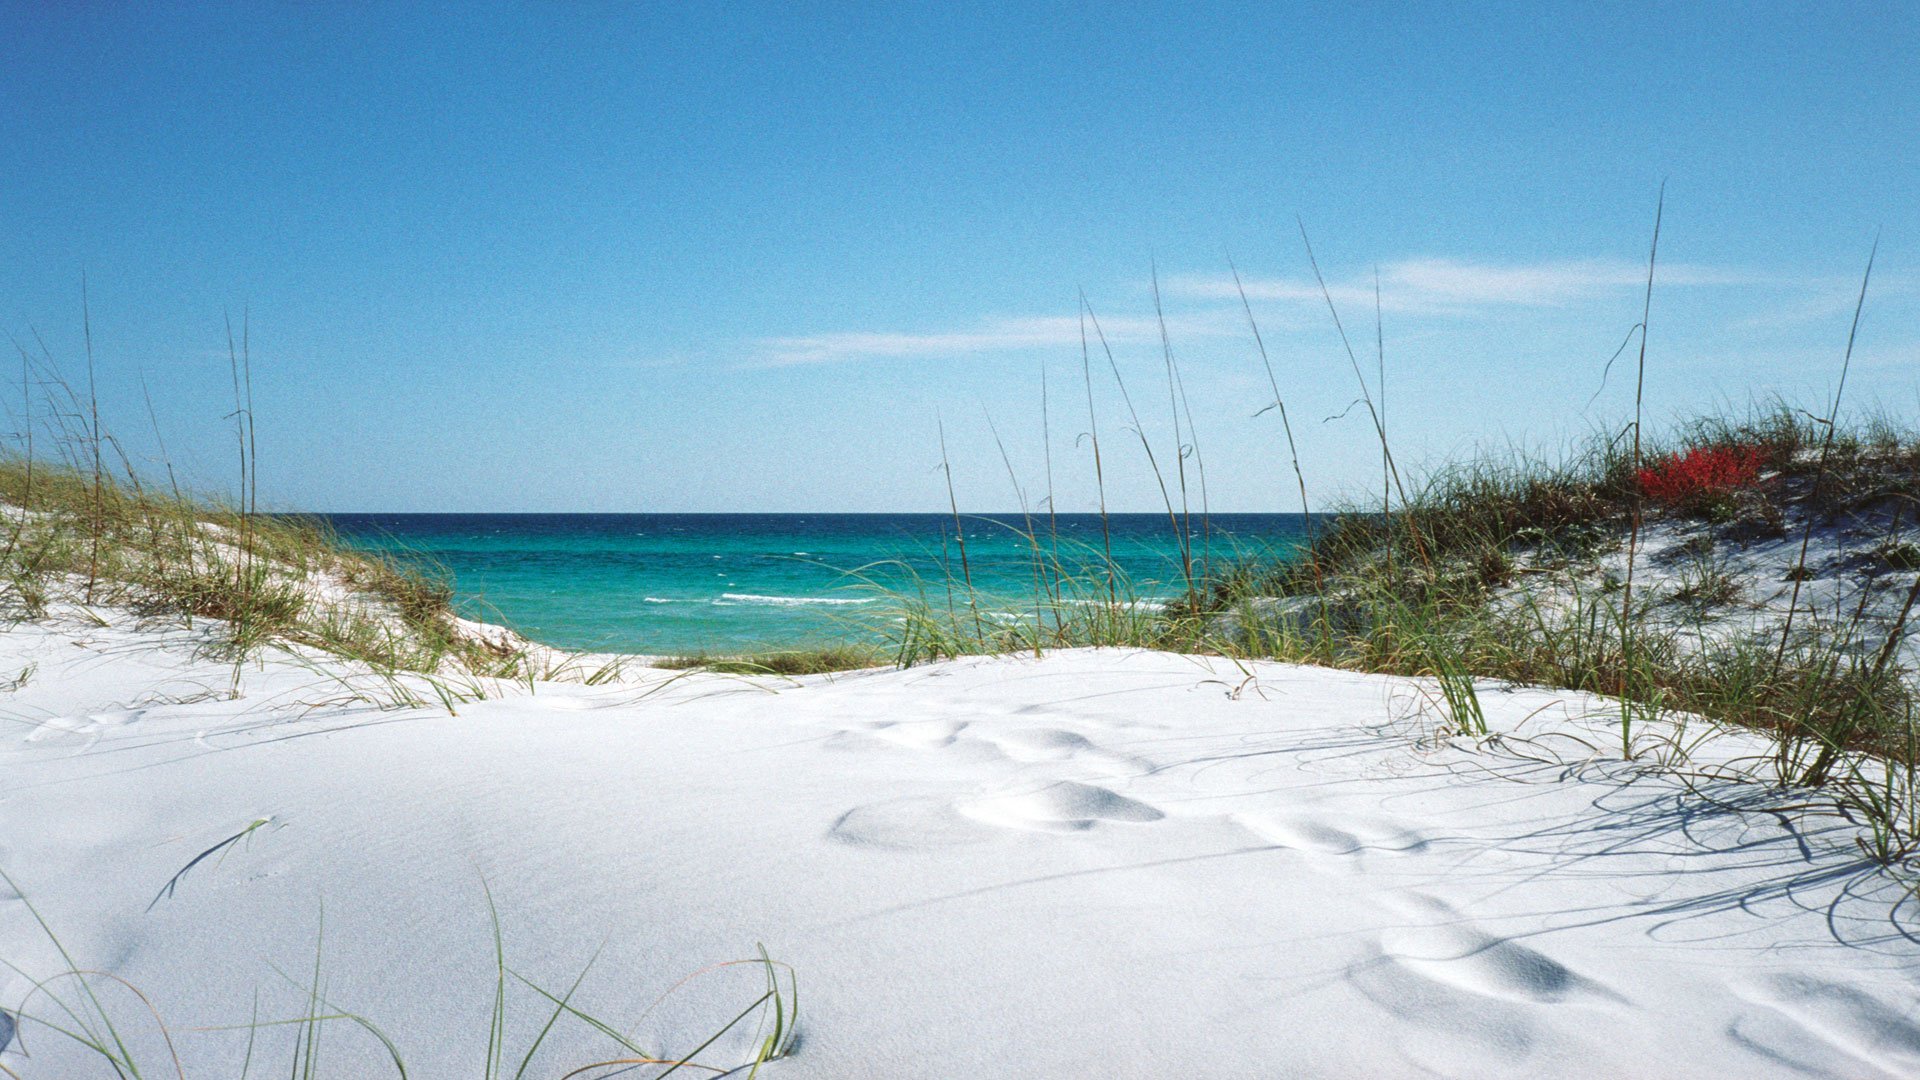 Grayton Beach Dunes below is shown smaller than the actual size of